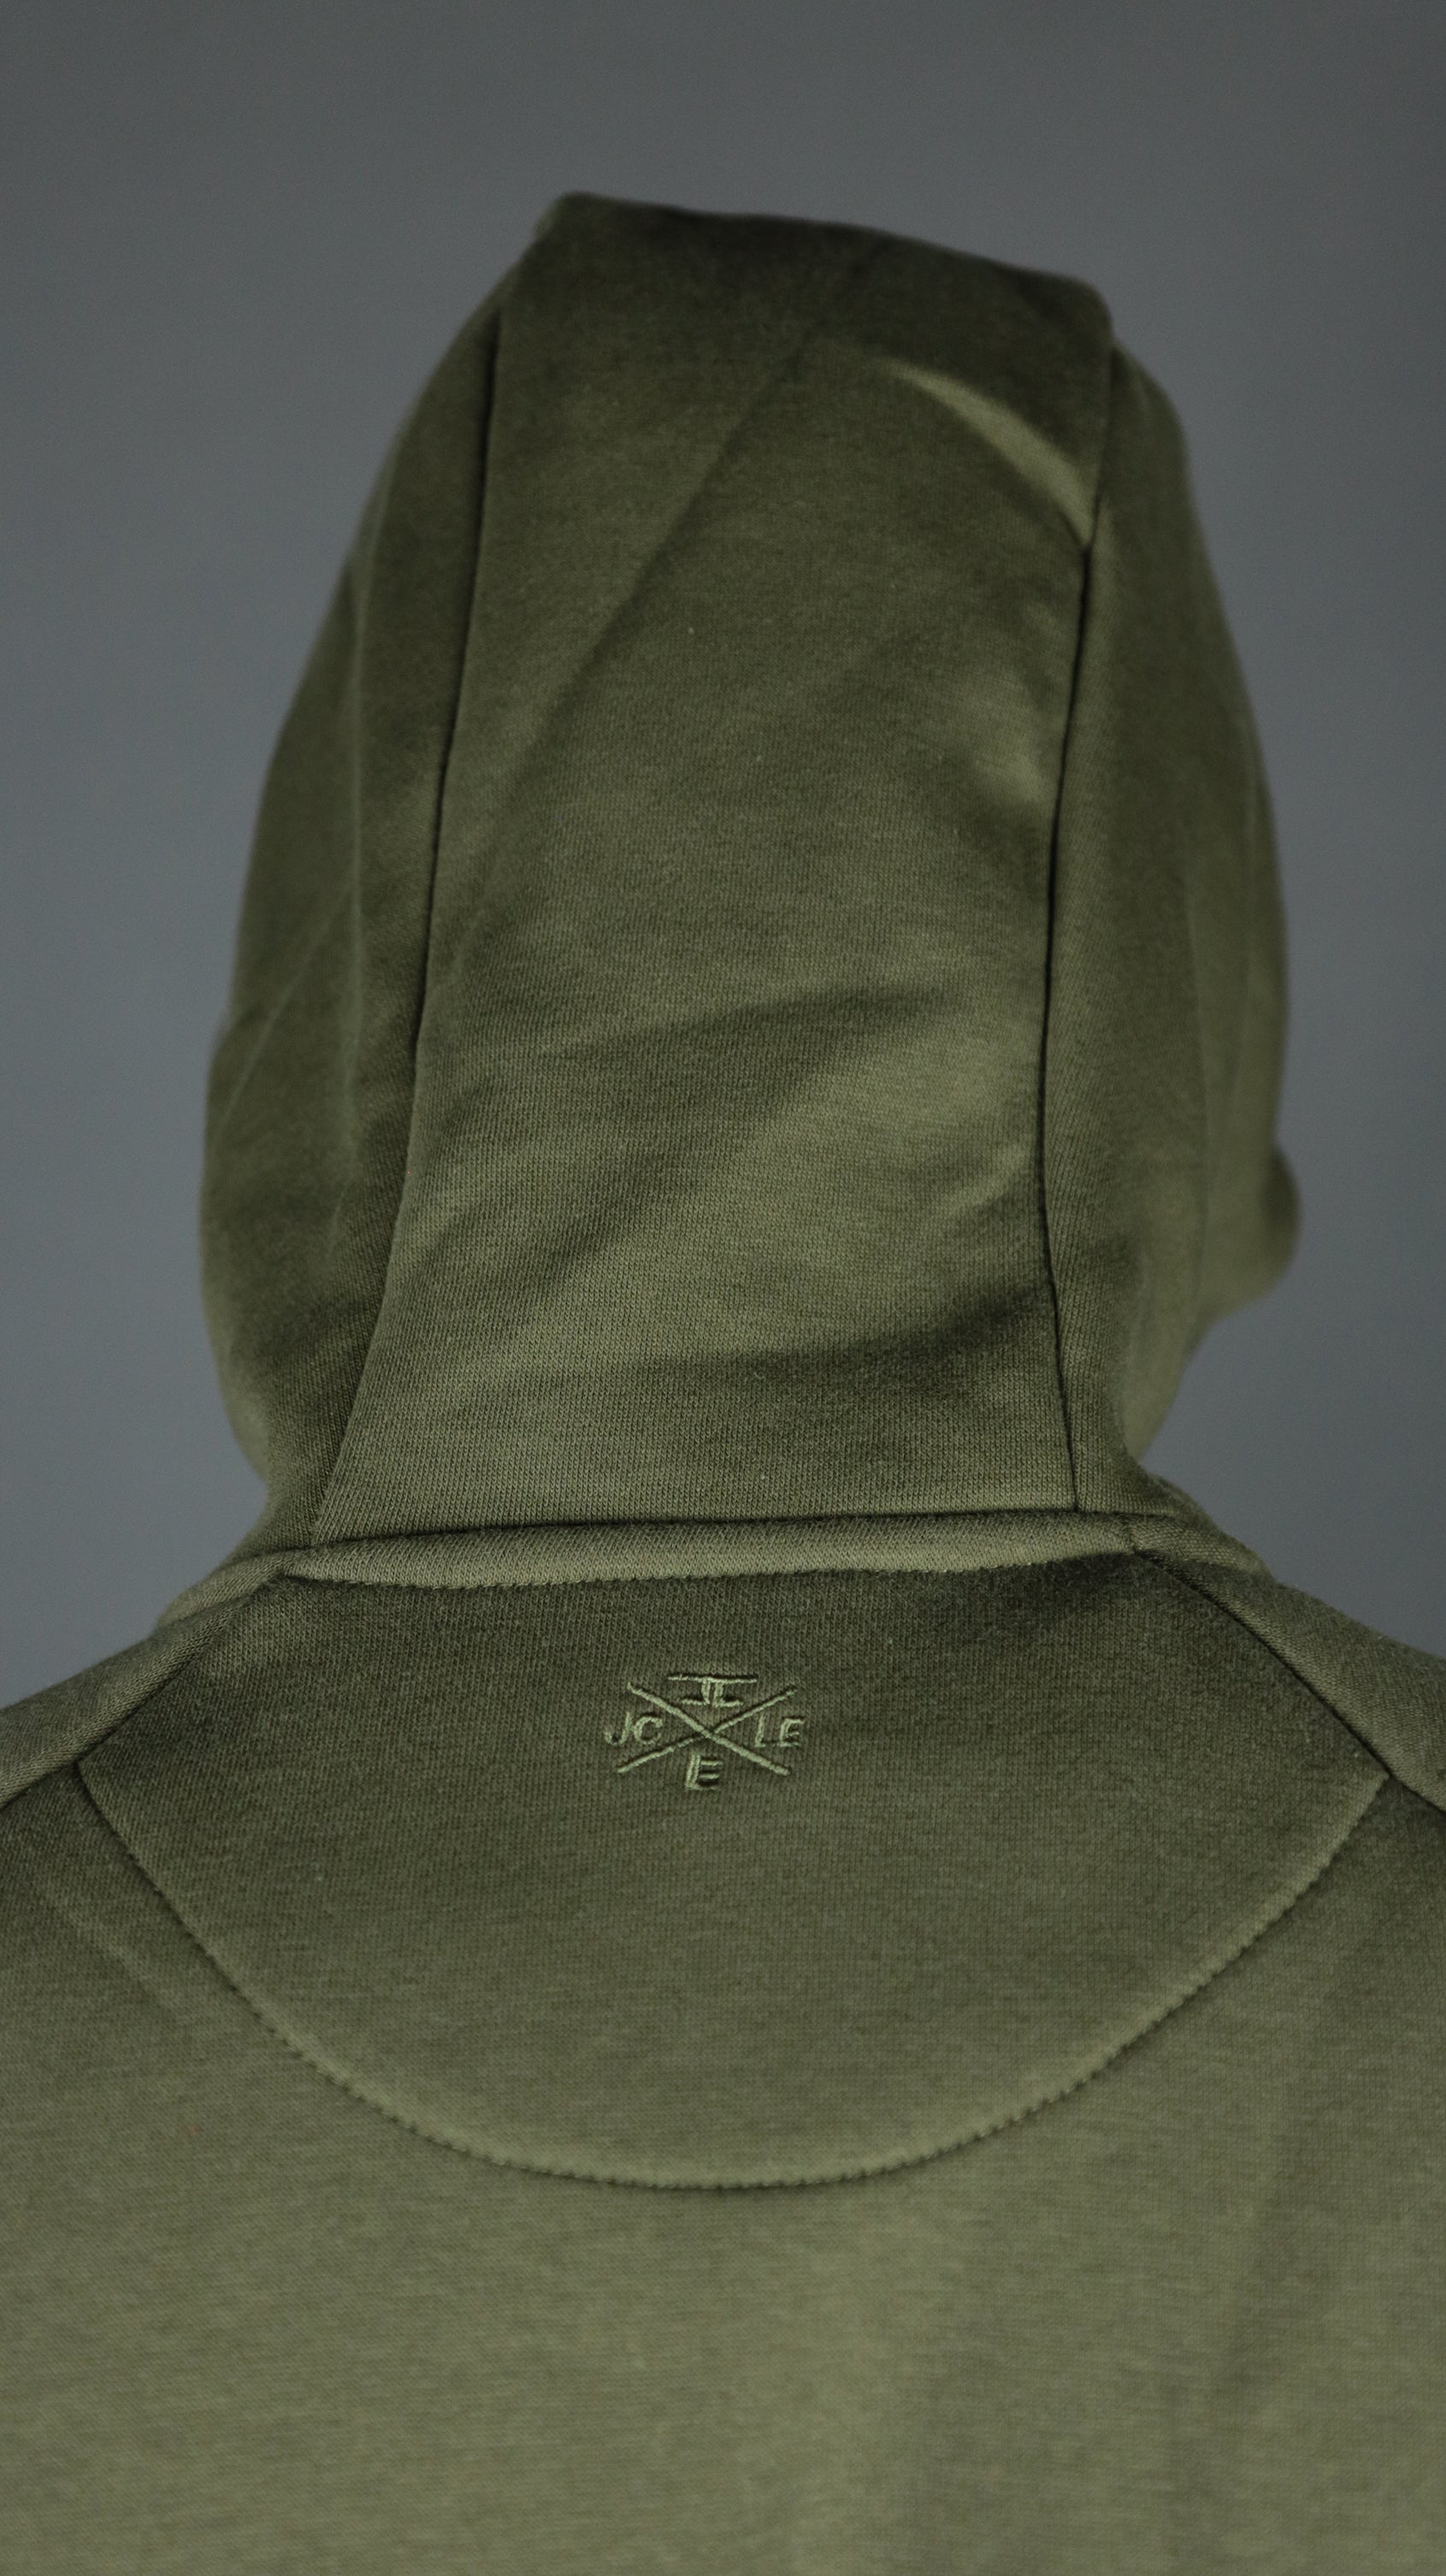 The back of the hood of the military olive green hoodie by Jordan Craig.